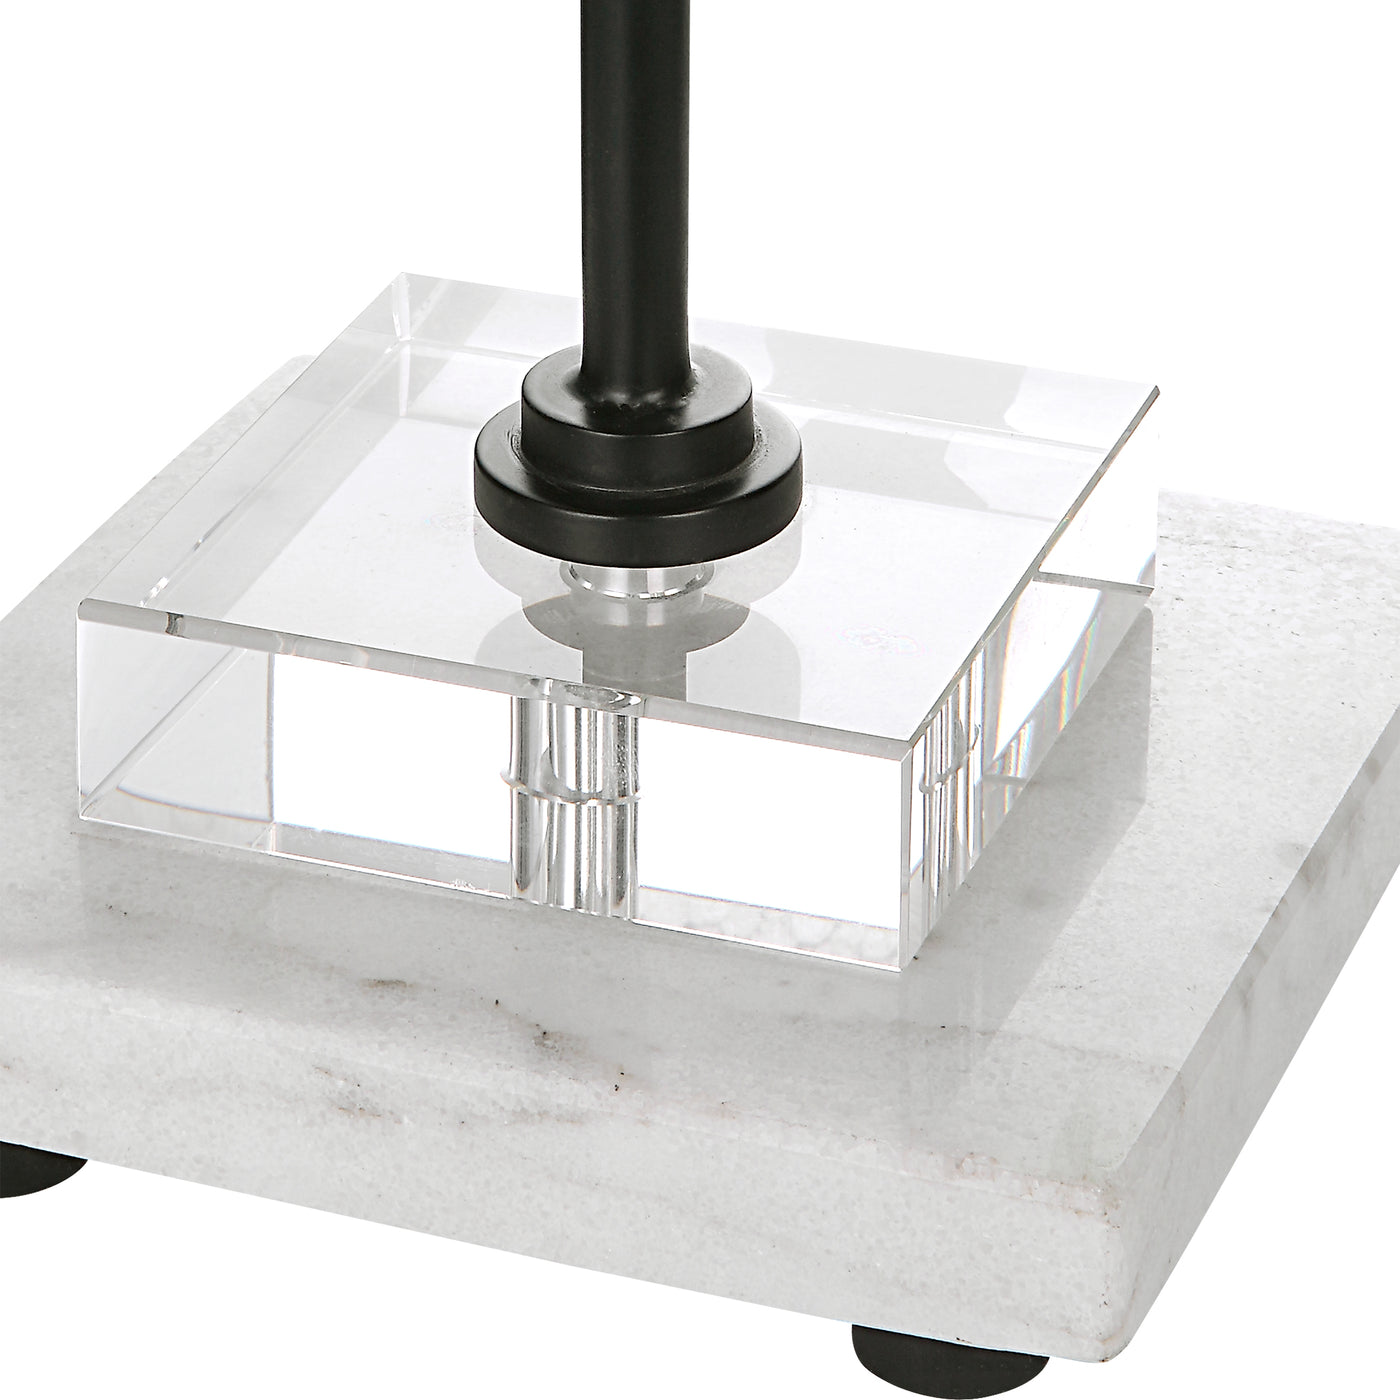 Sleek And Simple, This Buffet Lamps Features A Satin Black Metal Base Pearched On A Crystal Slab And A White Marble Foot W...